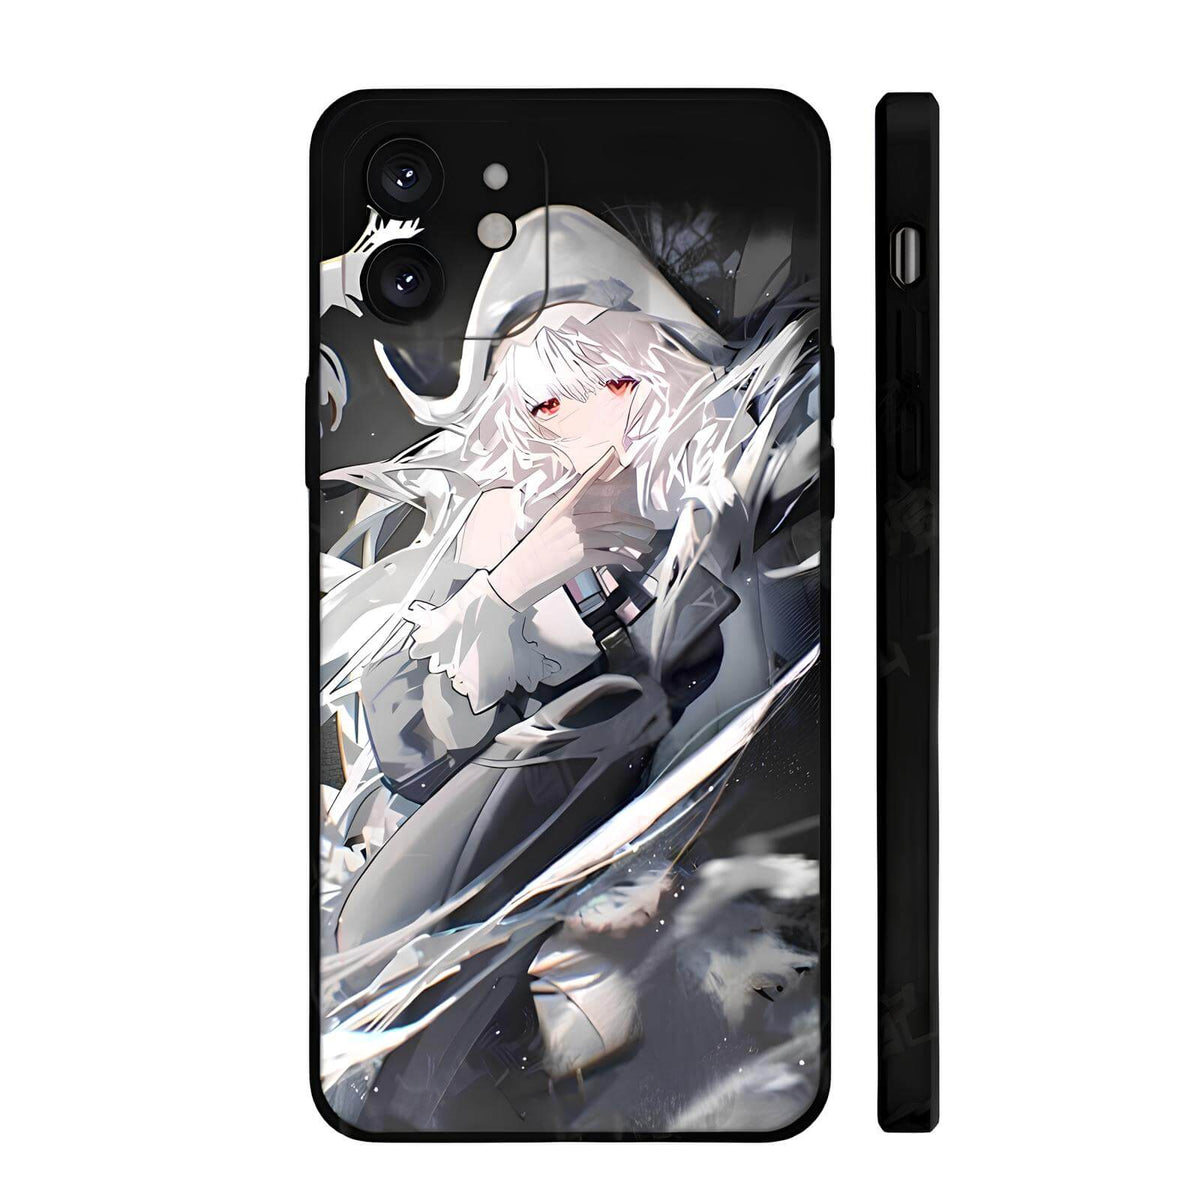 Specter the Unchained Style4 phone case